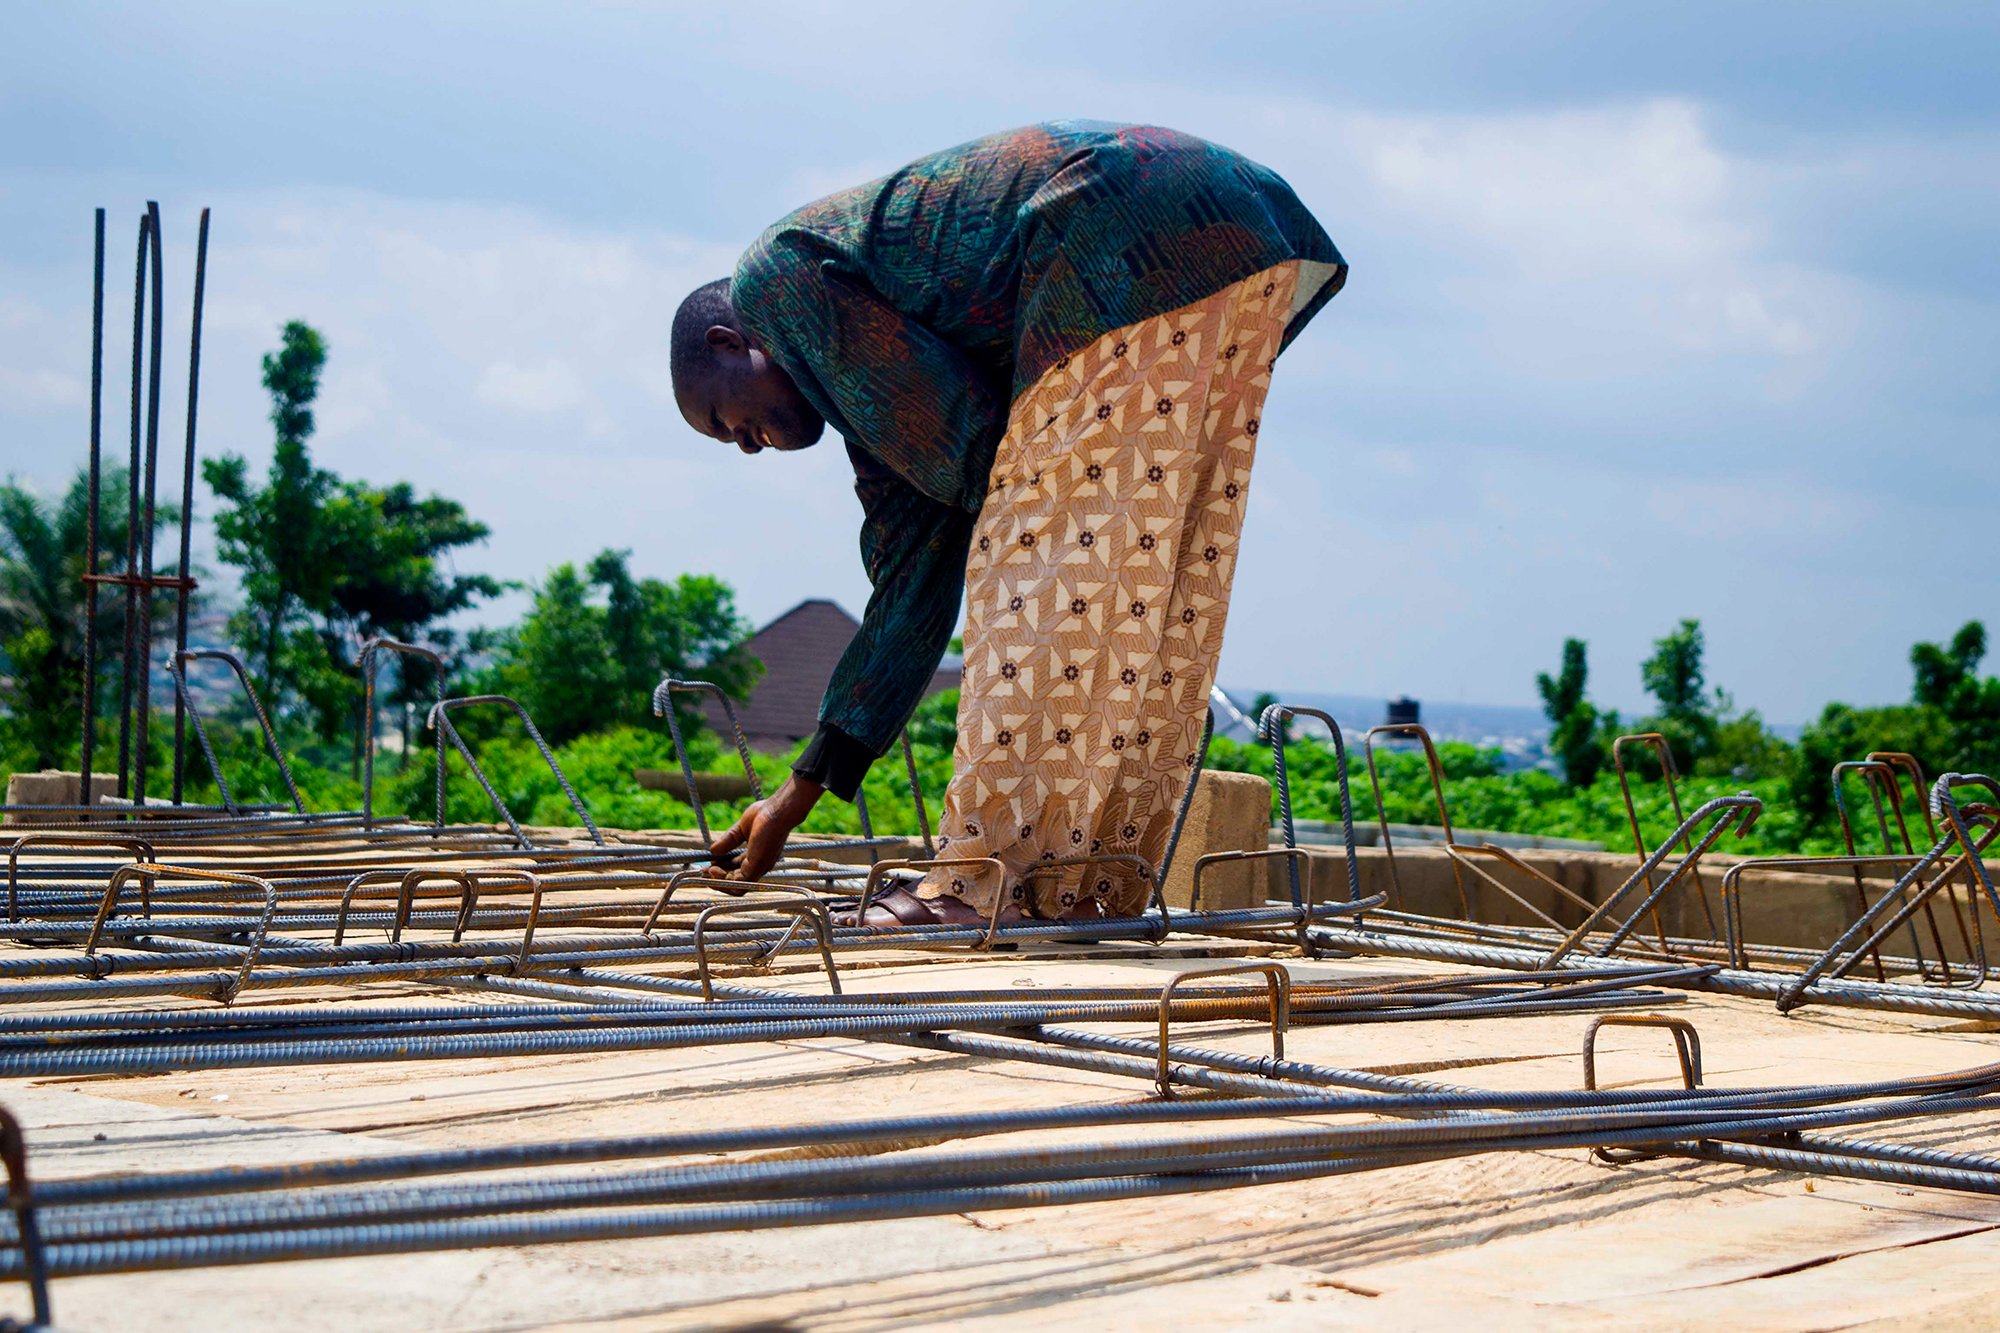 An irregular and self-employed Nigerian worker inspects steel rods and cement in Ibadan.